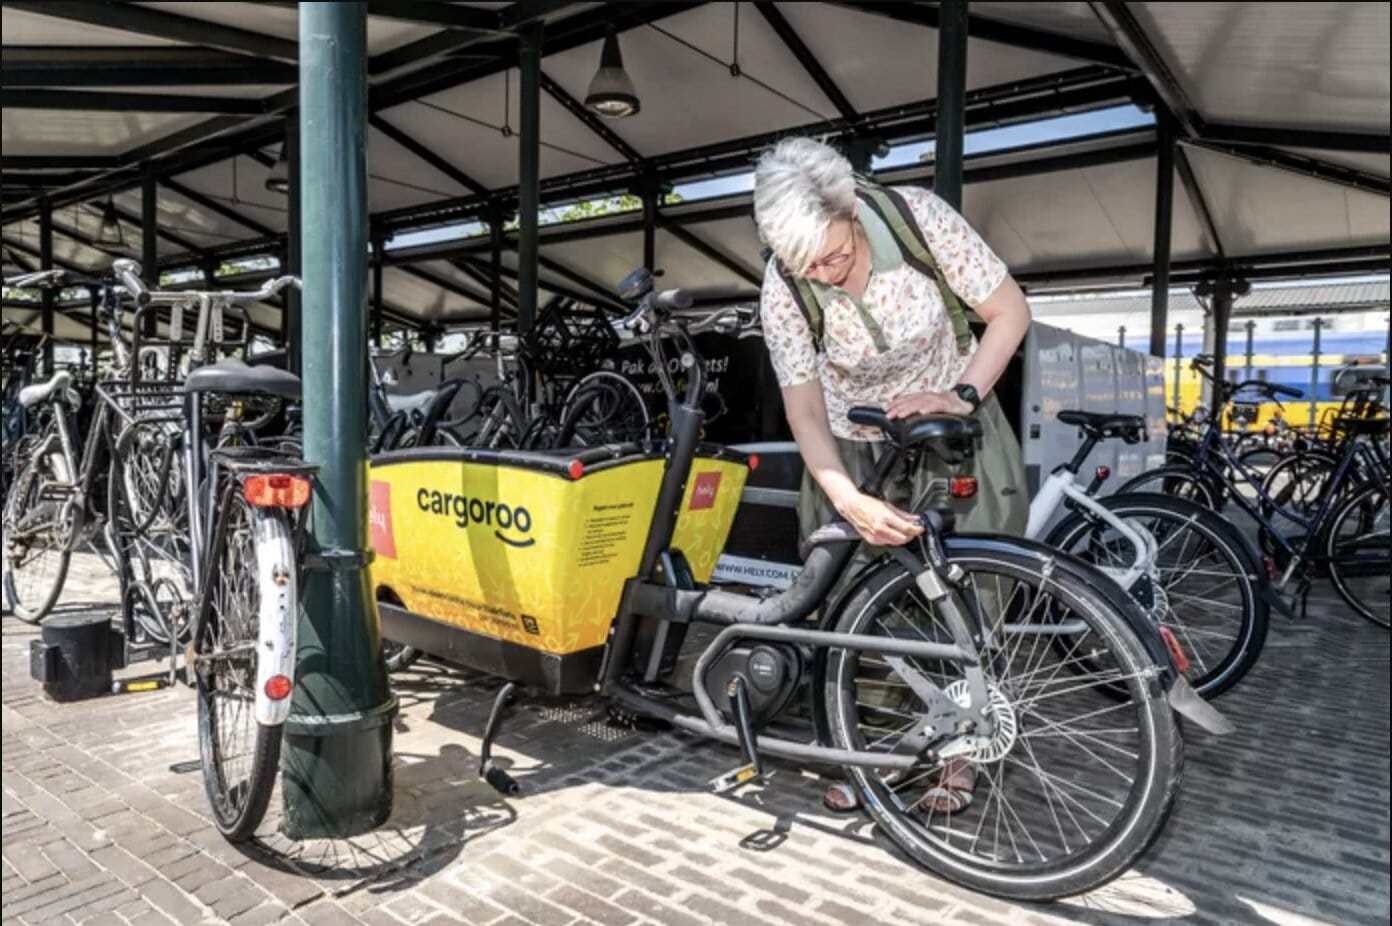 At Brandevoort Station in Helmond you can now find Hely cars and cargo bikes.